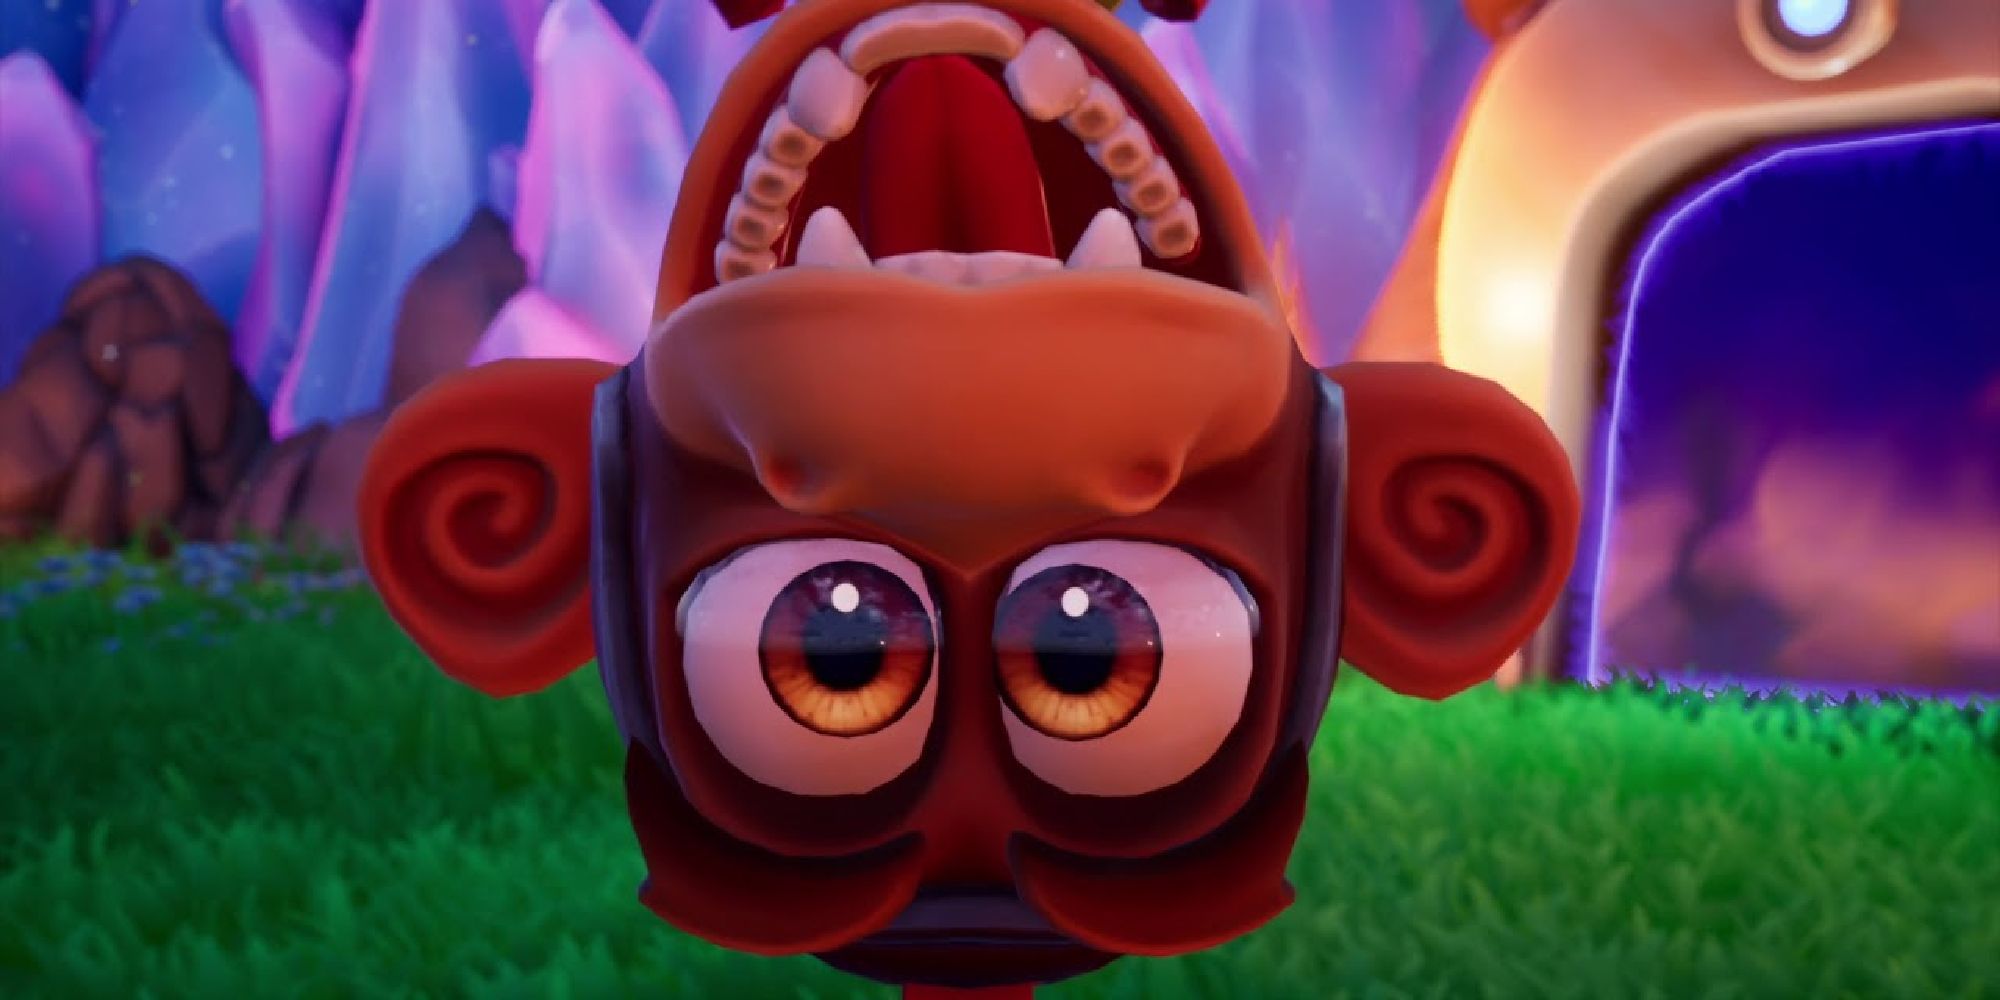 A close-up of Agent 9 dangling upside down in Spyro Reignited Trilogy